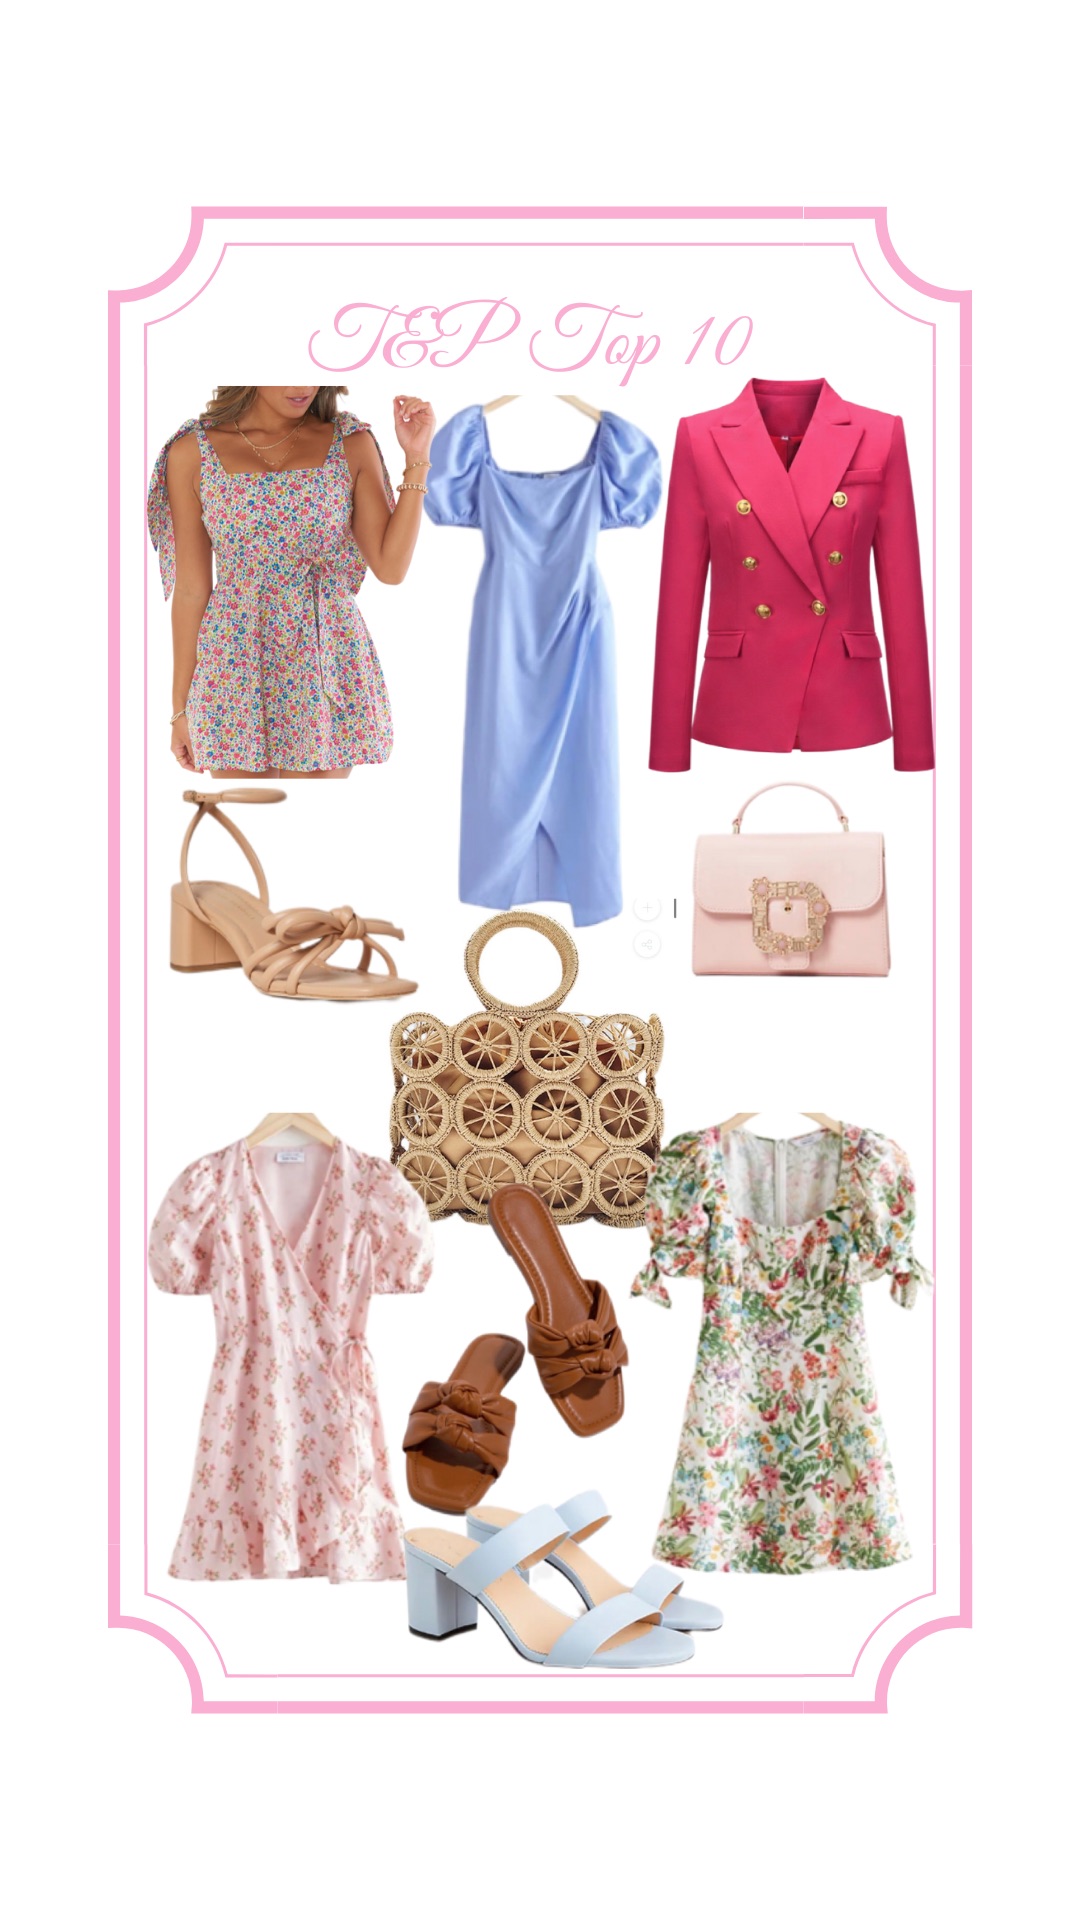 Wedding Guest Dresses, Floral Dresses, Summer Shoes and Accessories, midi dress, blazer, top 10, top 10 finds of the week, shopping, pink blazer, nude block heels, straw bag, top handle bag